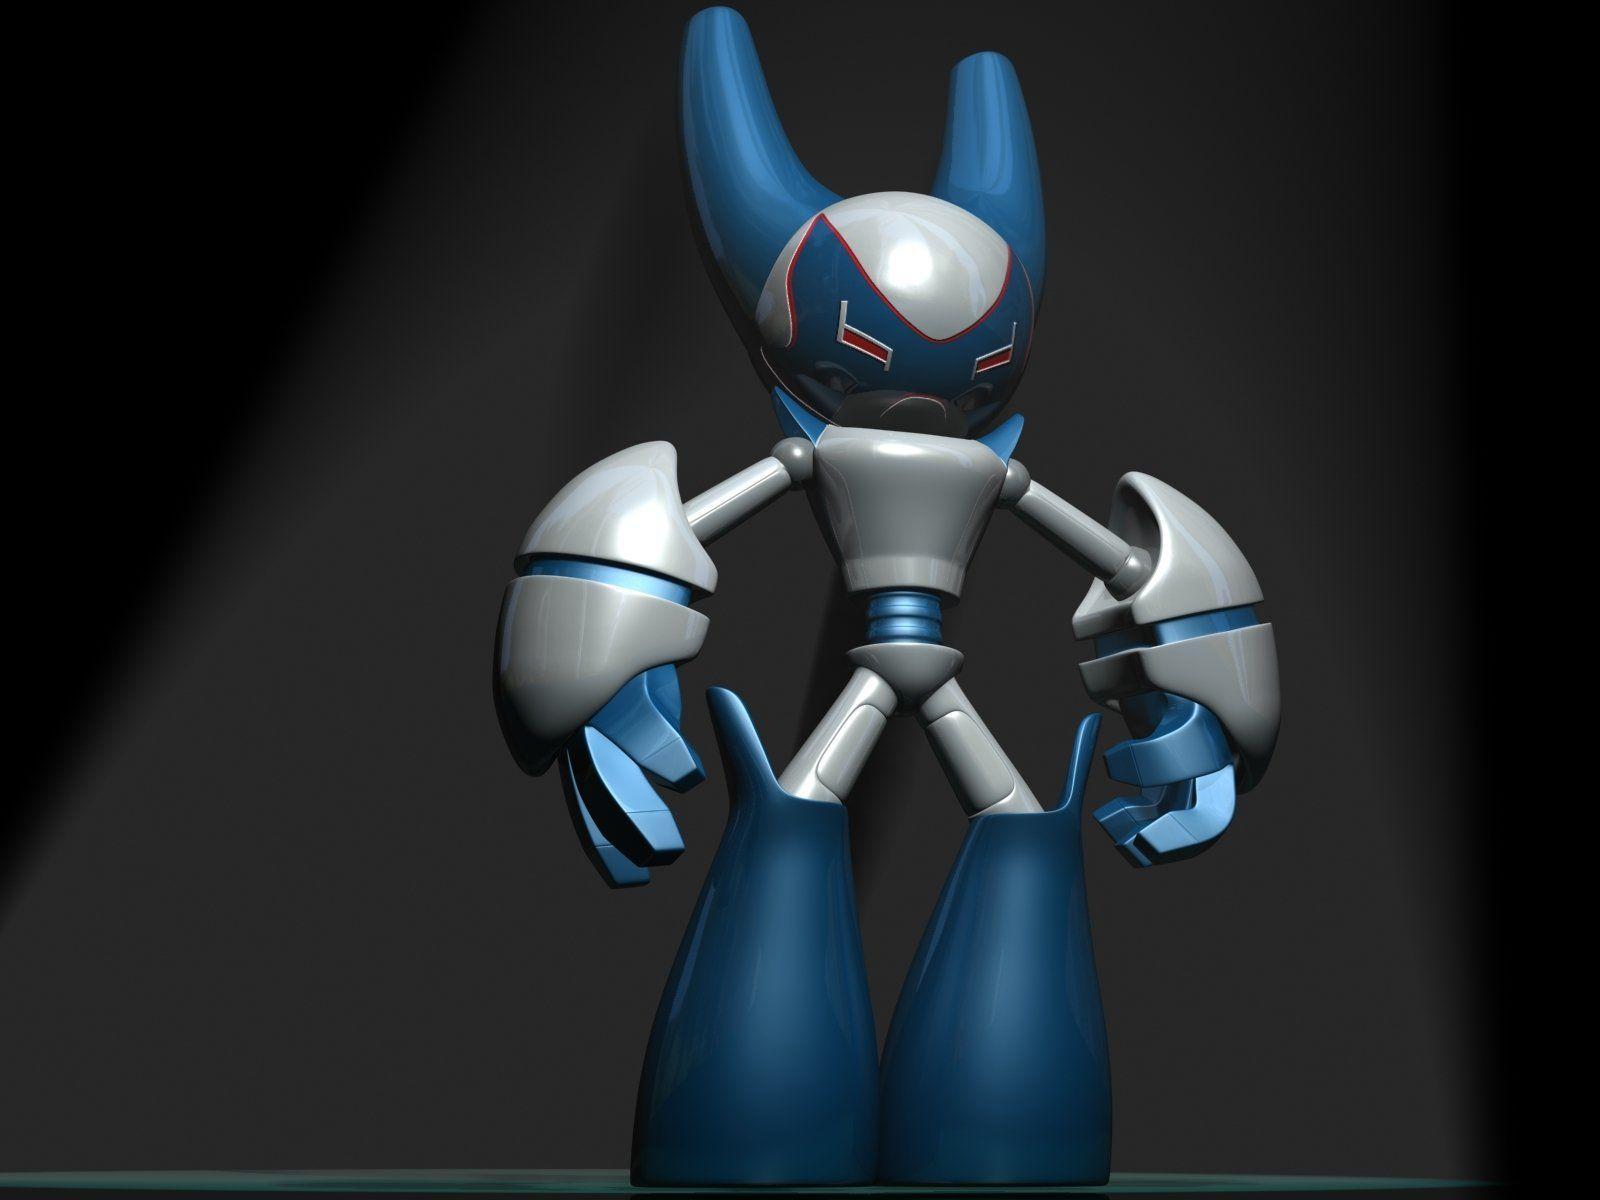 RobotBoy 3D Wallpaper and Background Imagex1200